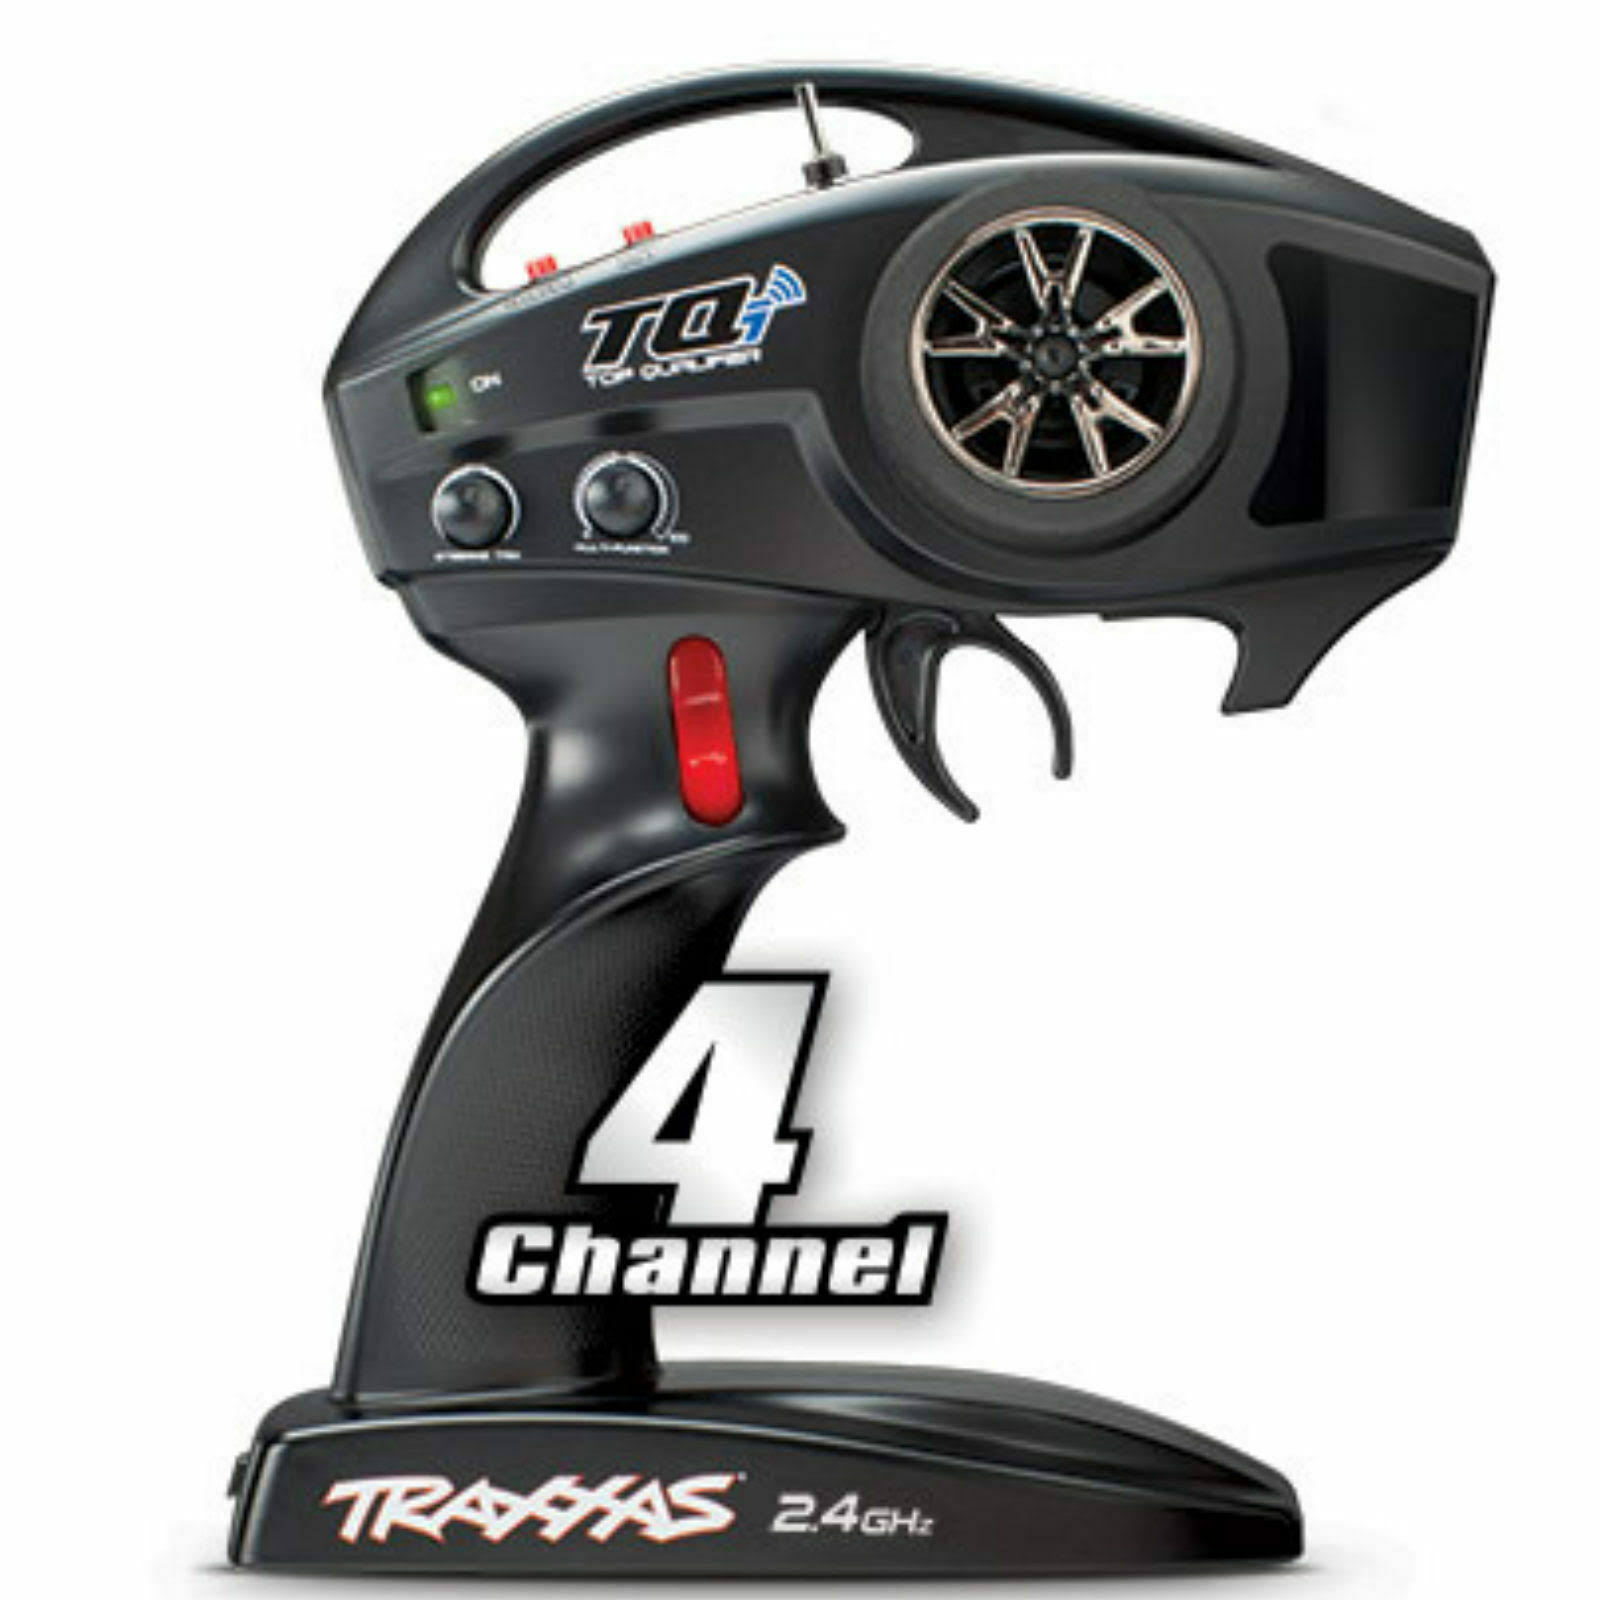 Traxxas Link Enabled Hi Output Vehicle Transmitter - 2.4ghz, 4 channel